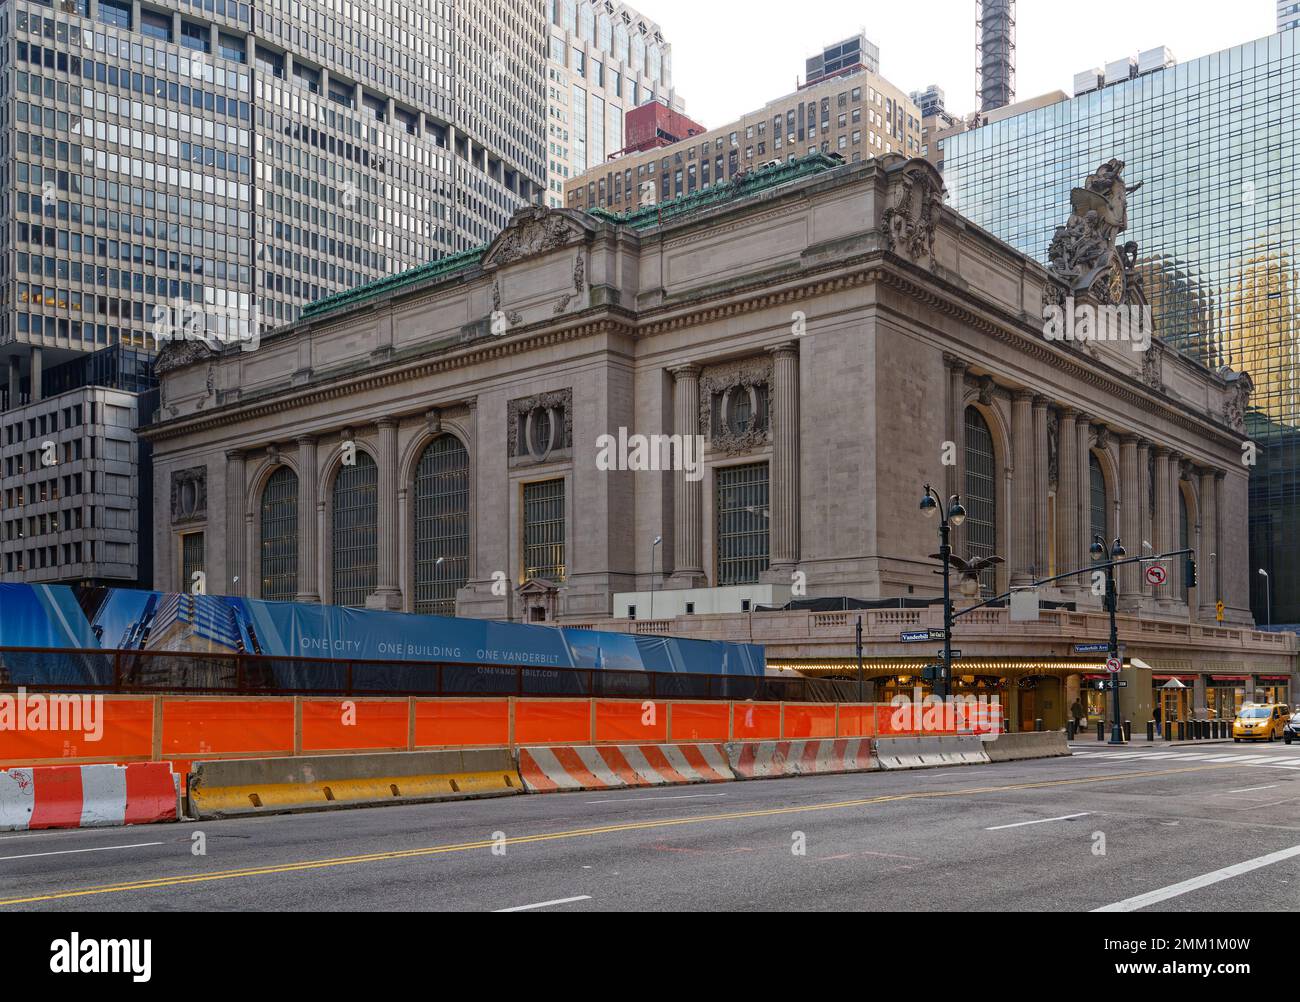 Rare view of Grand Central Terminal: After the site of One Vanderbilt was demolished, and before construction reached street level. Stock Photo